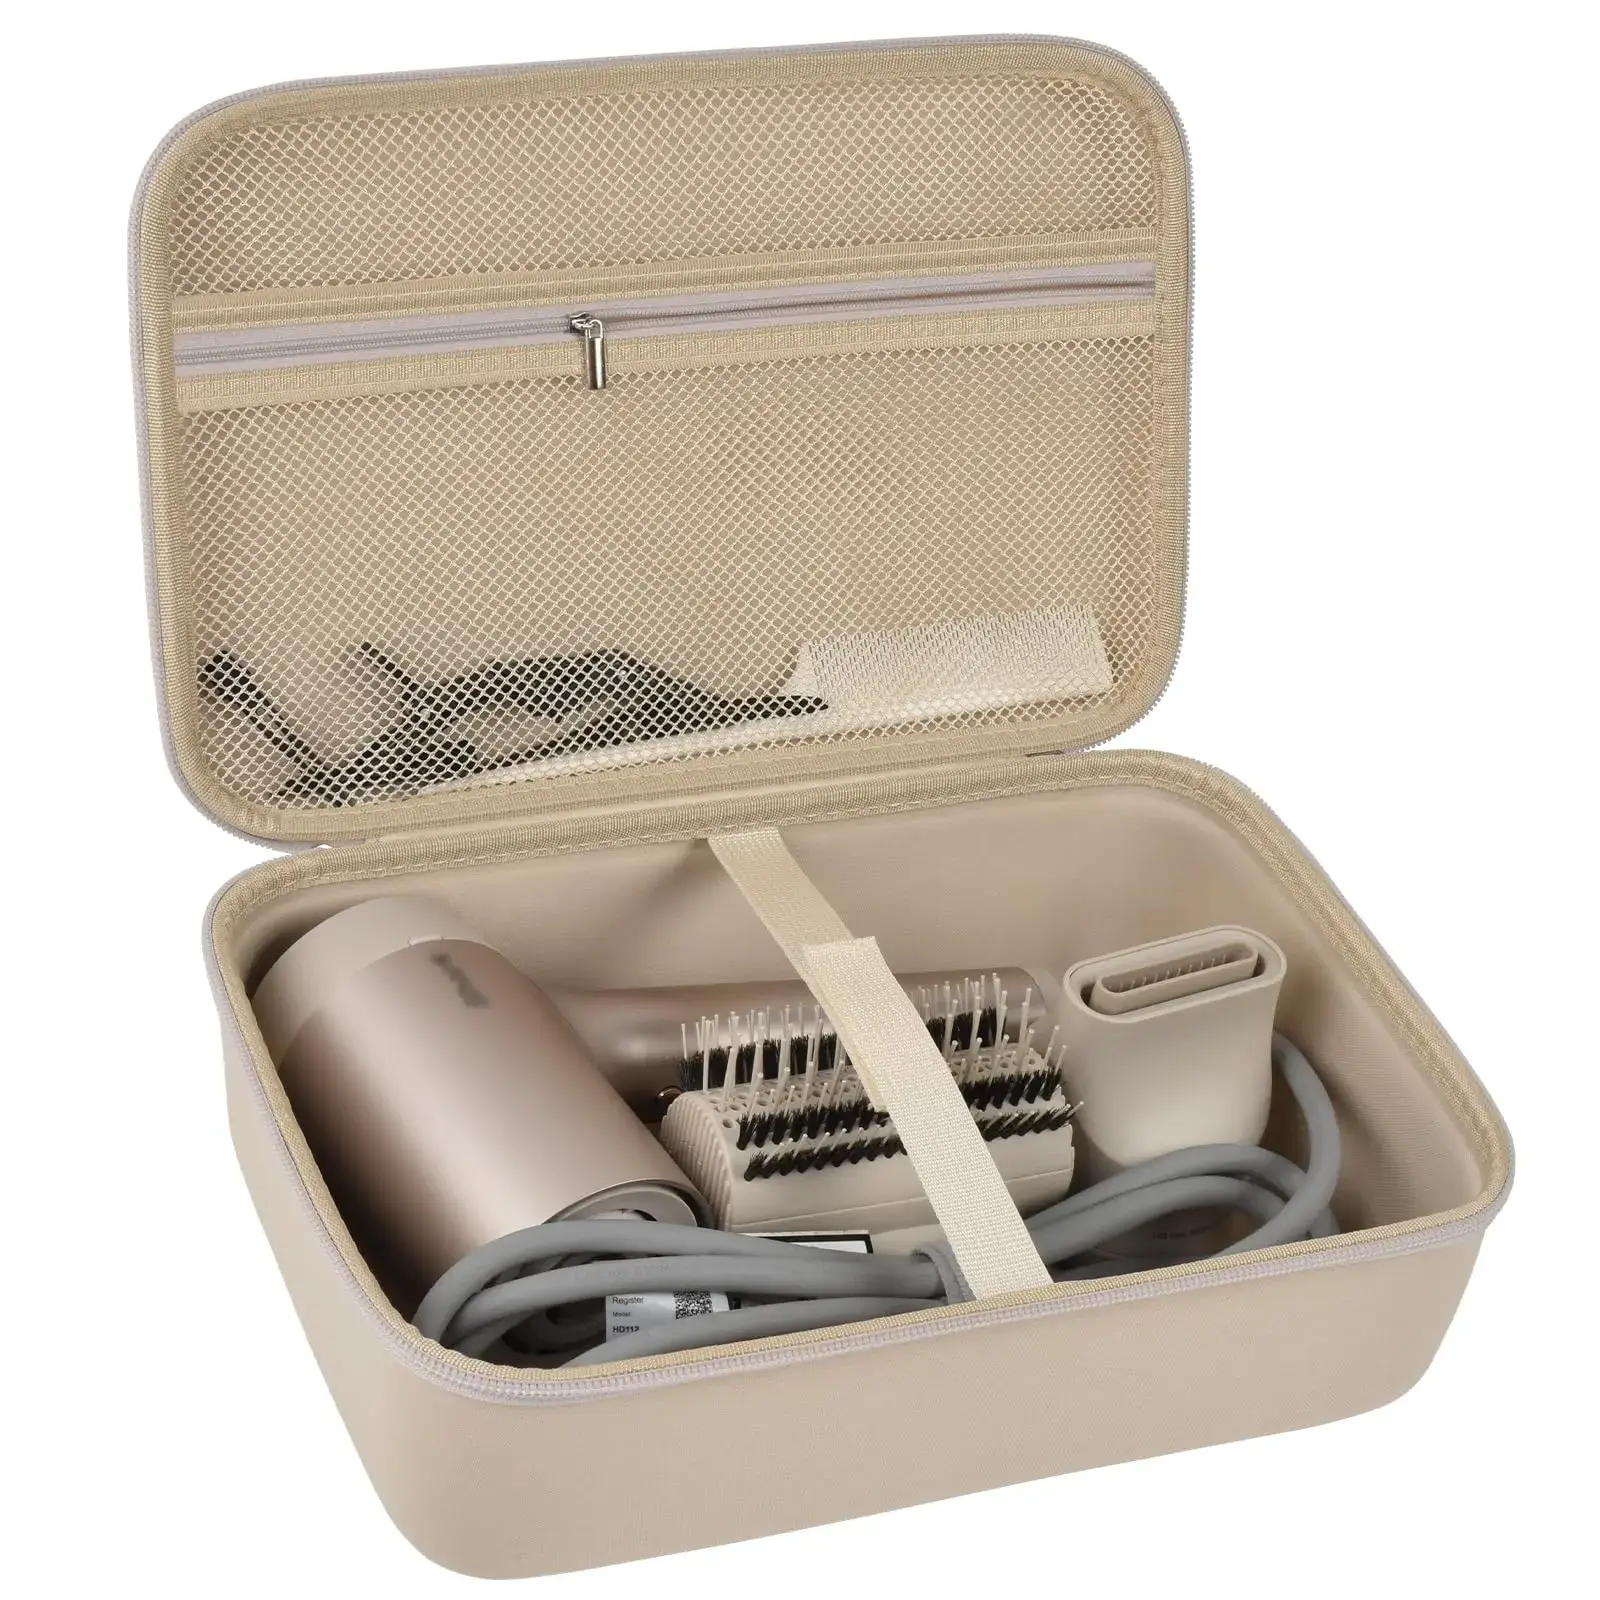 Travel case with hair dryer and brush neatly packed inside.